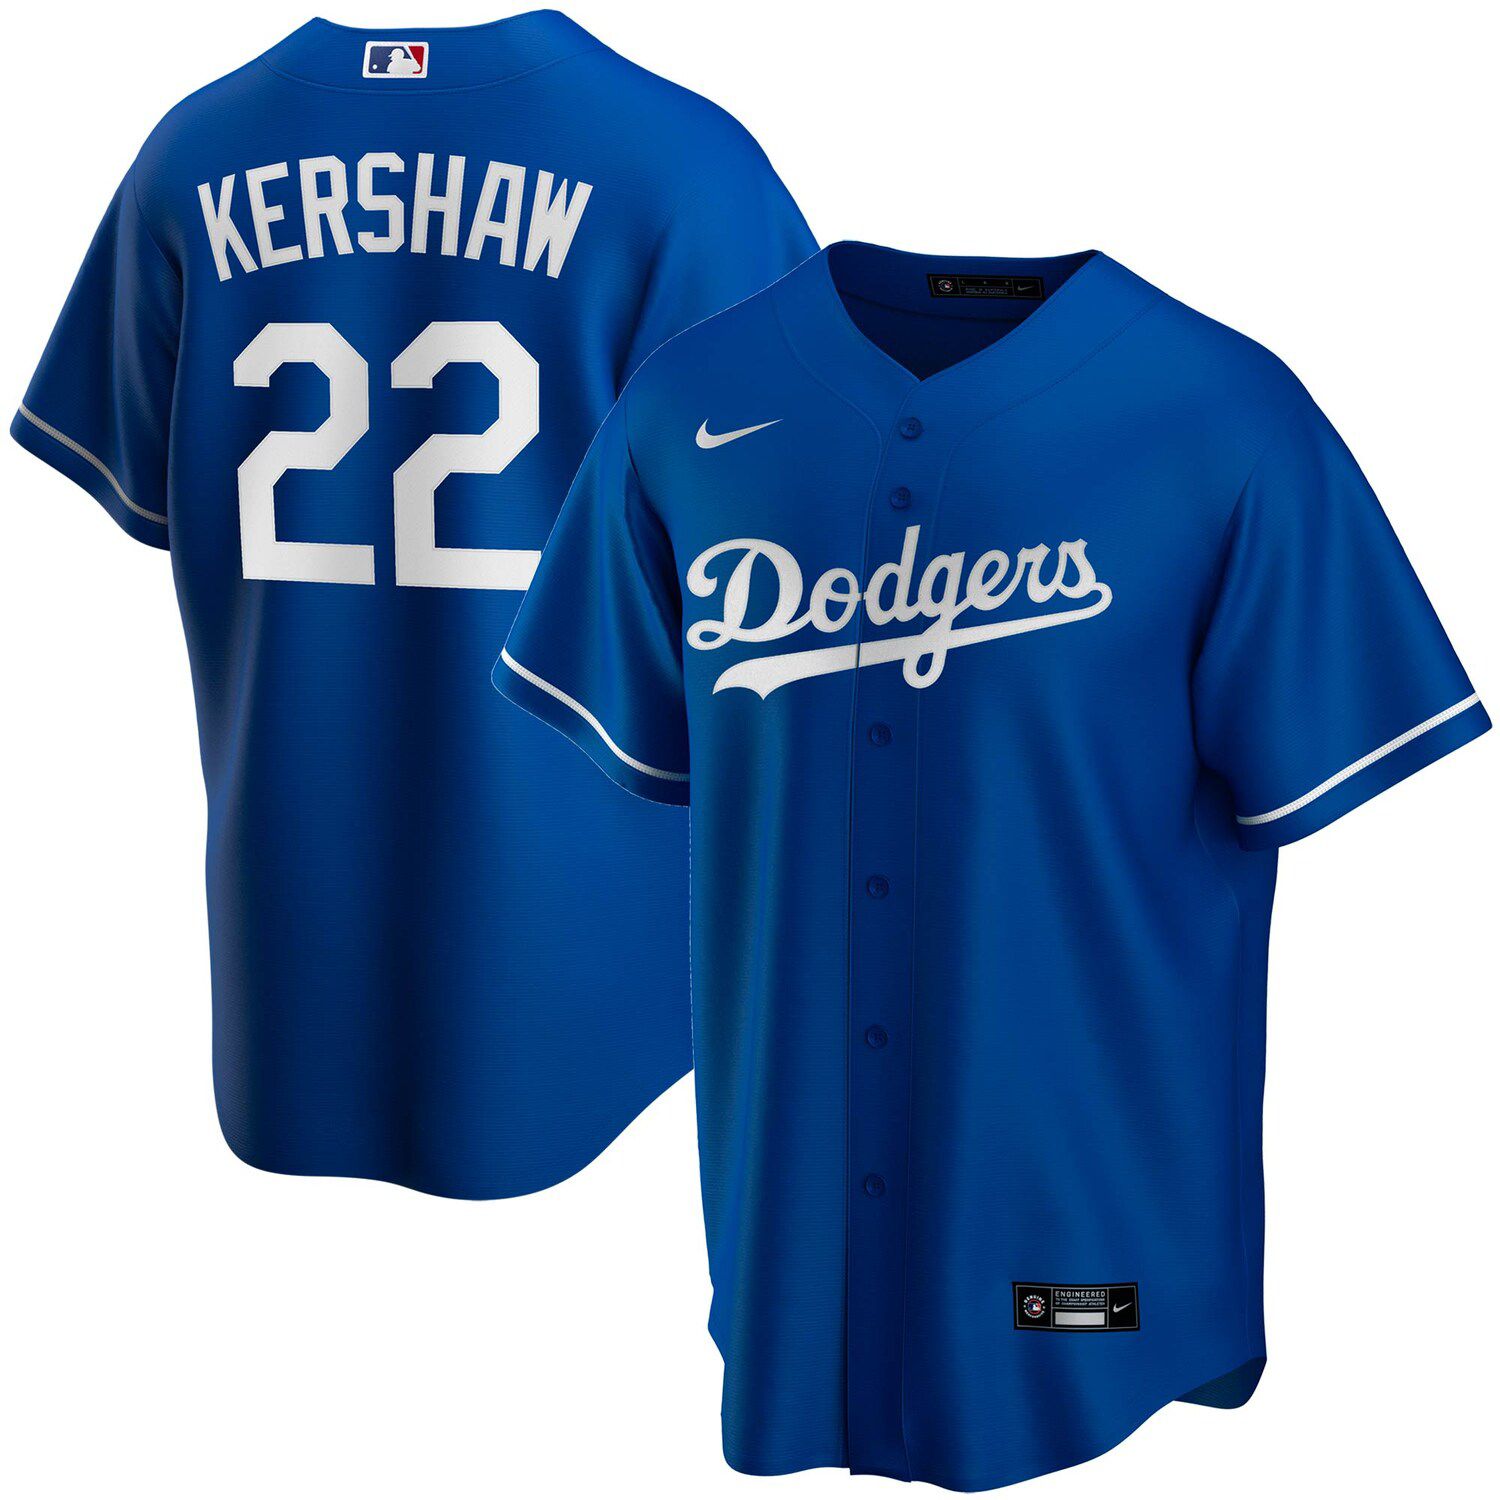 youth kershaw jersey